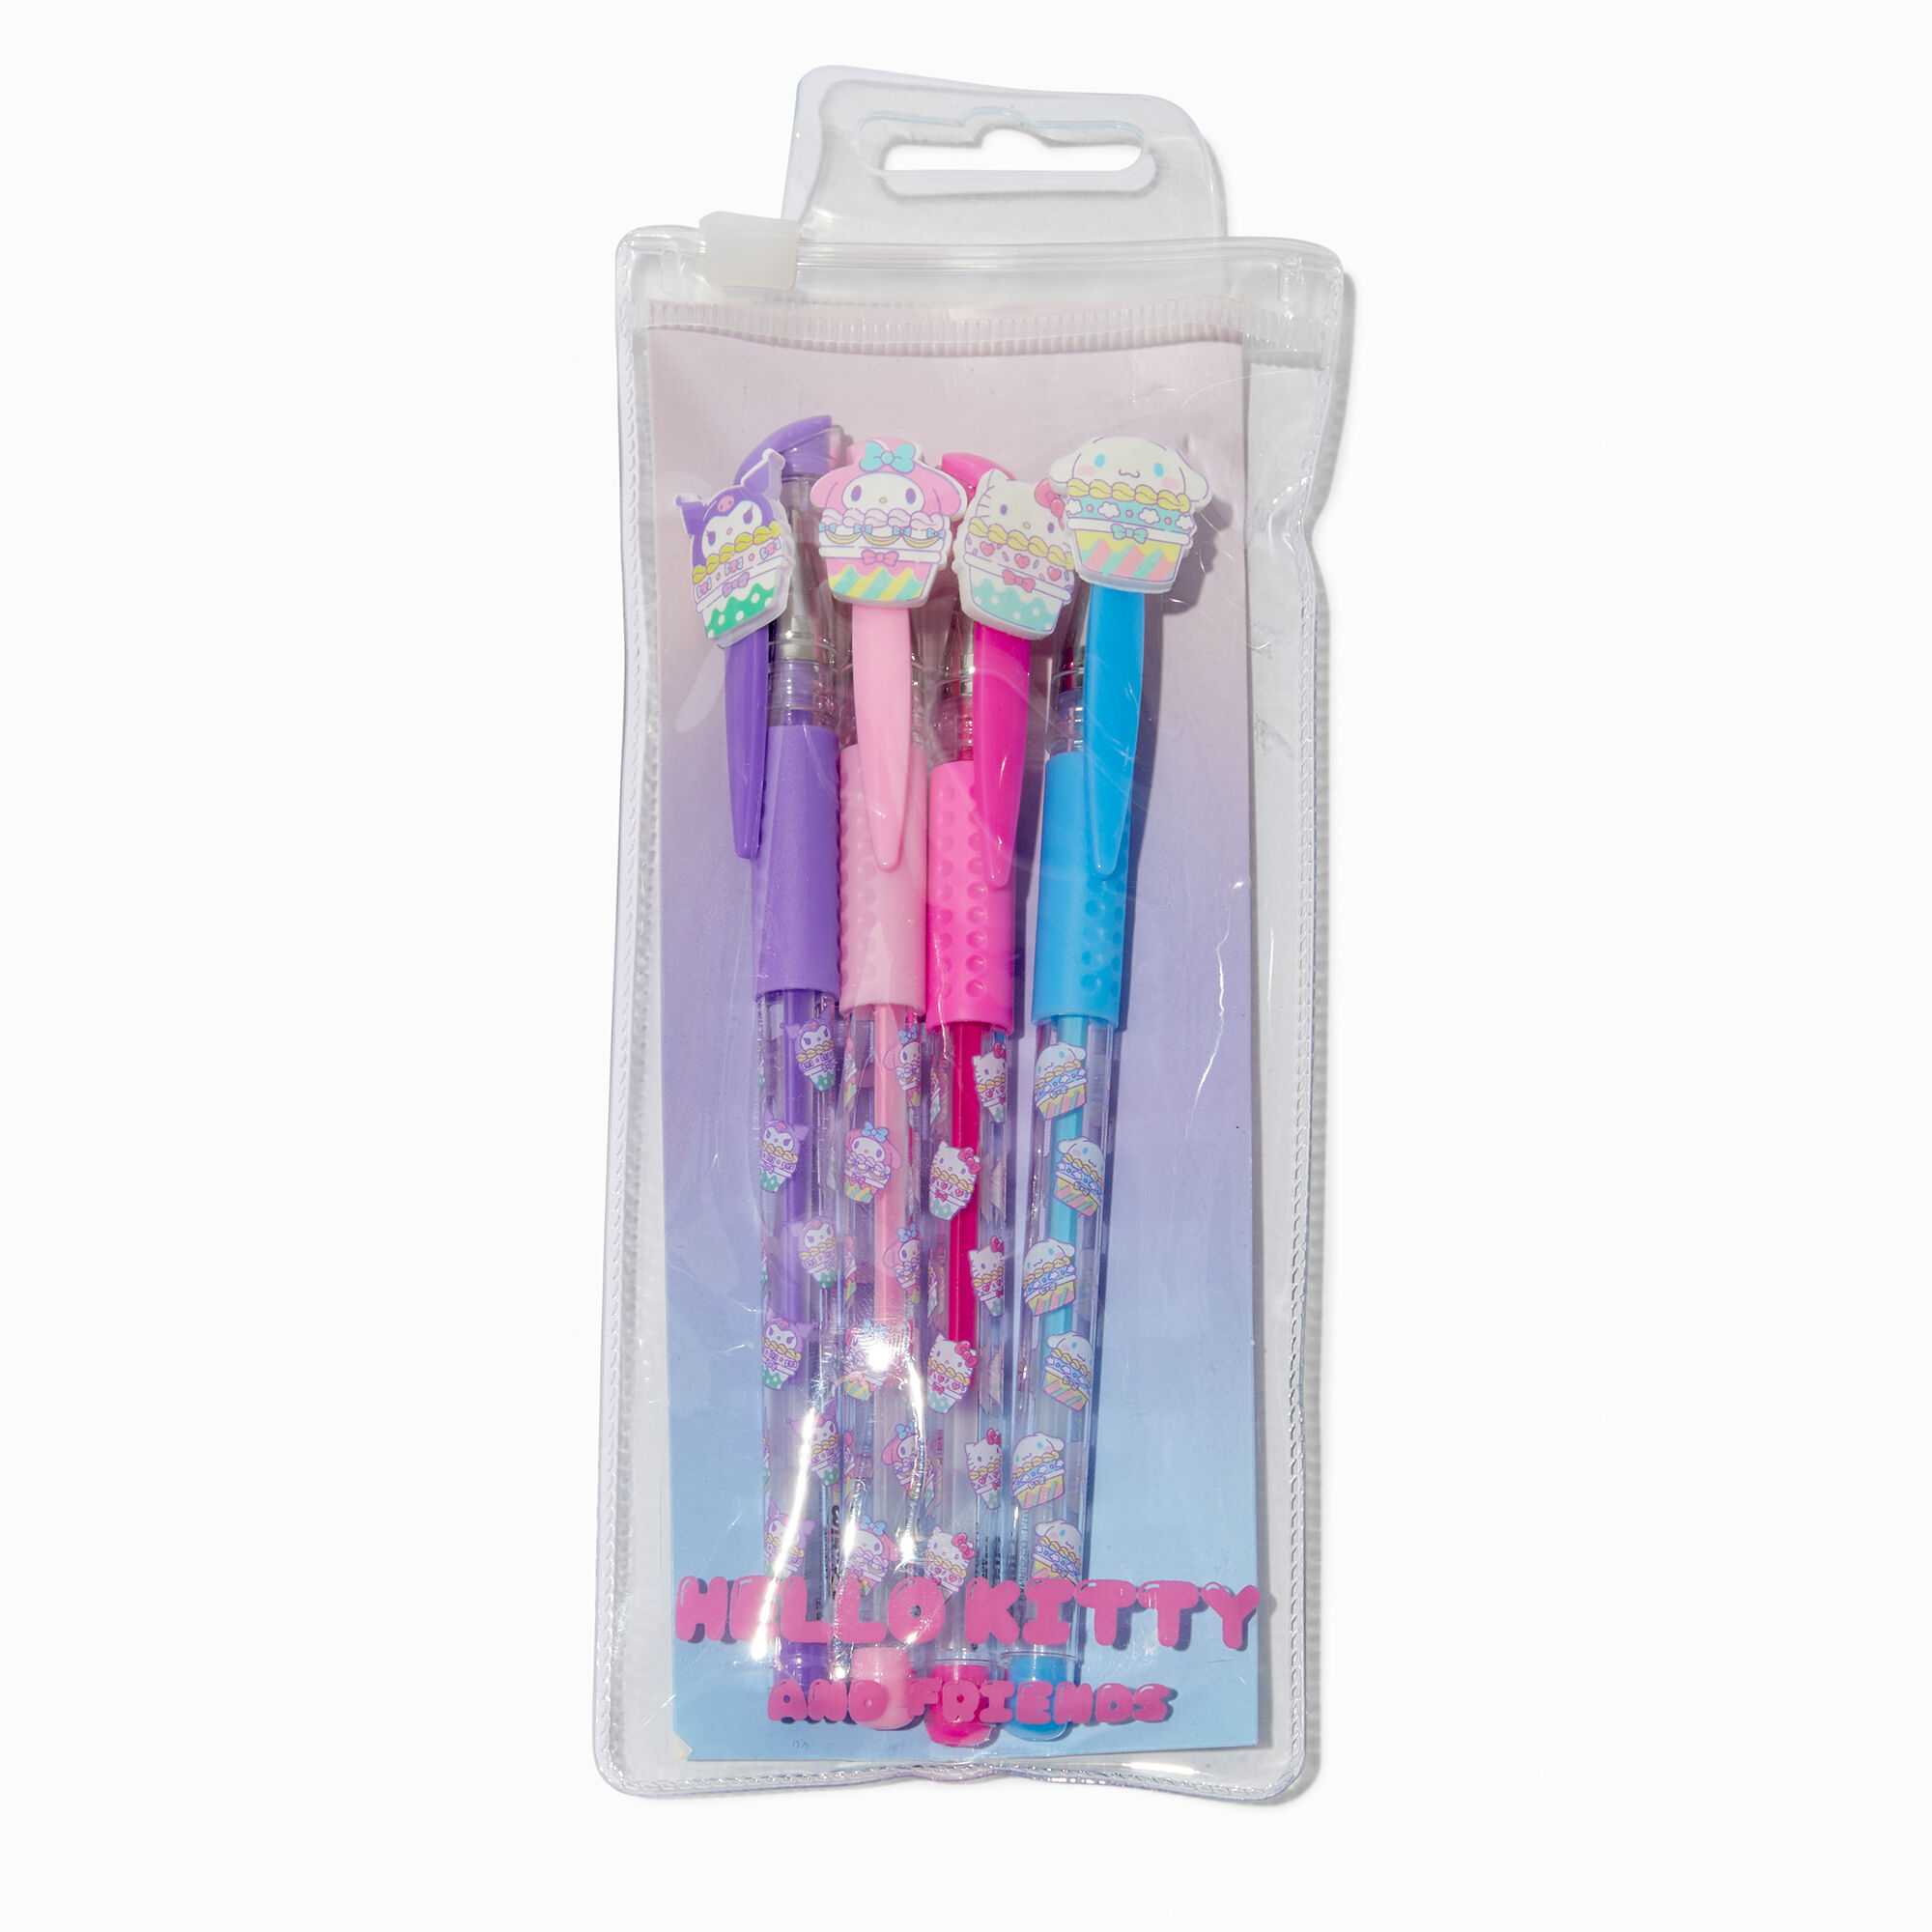 View Claires Hello Kitty And Friends Pen Set 4 Pack information